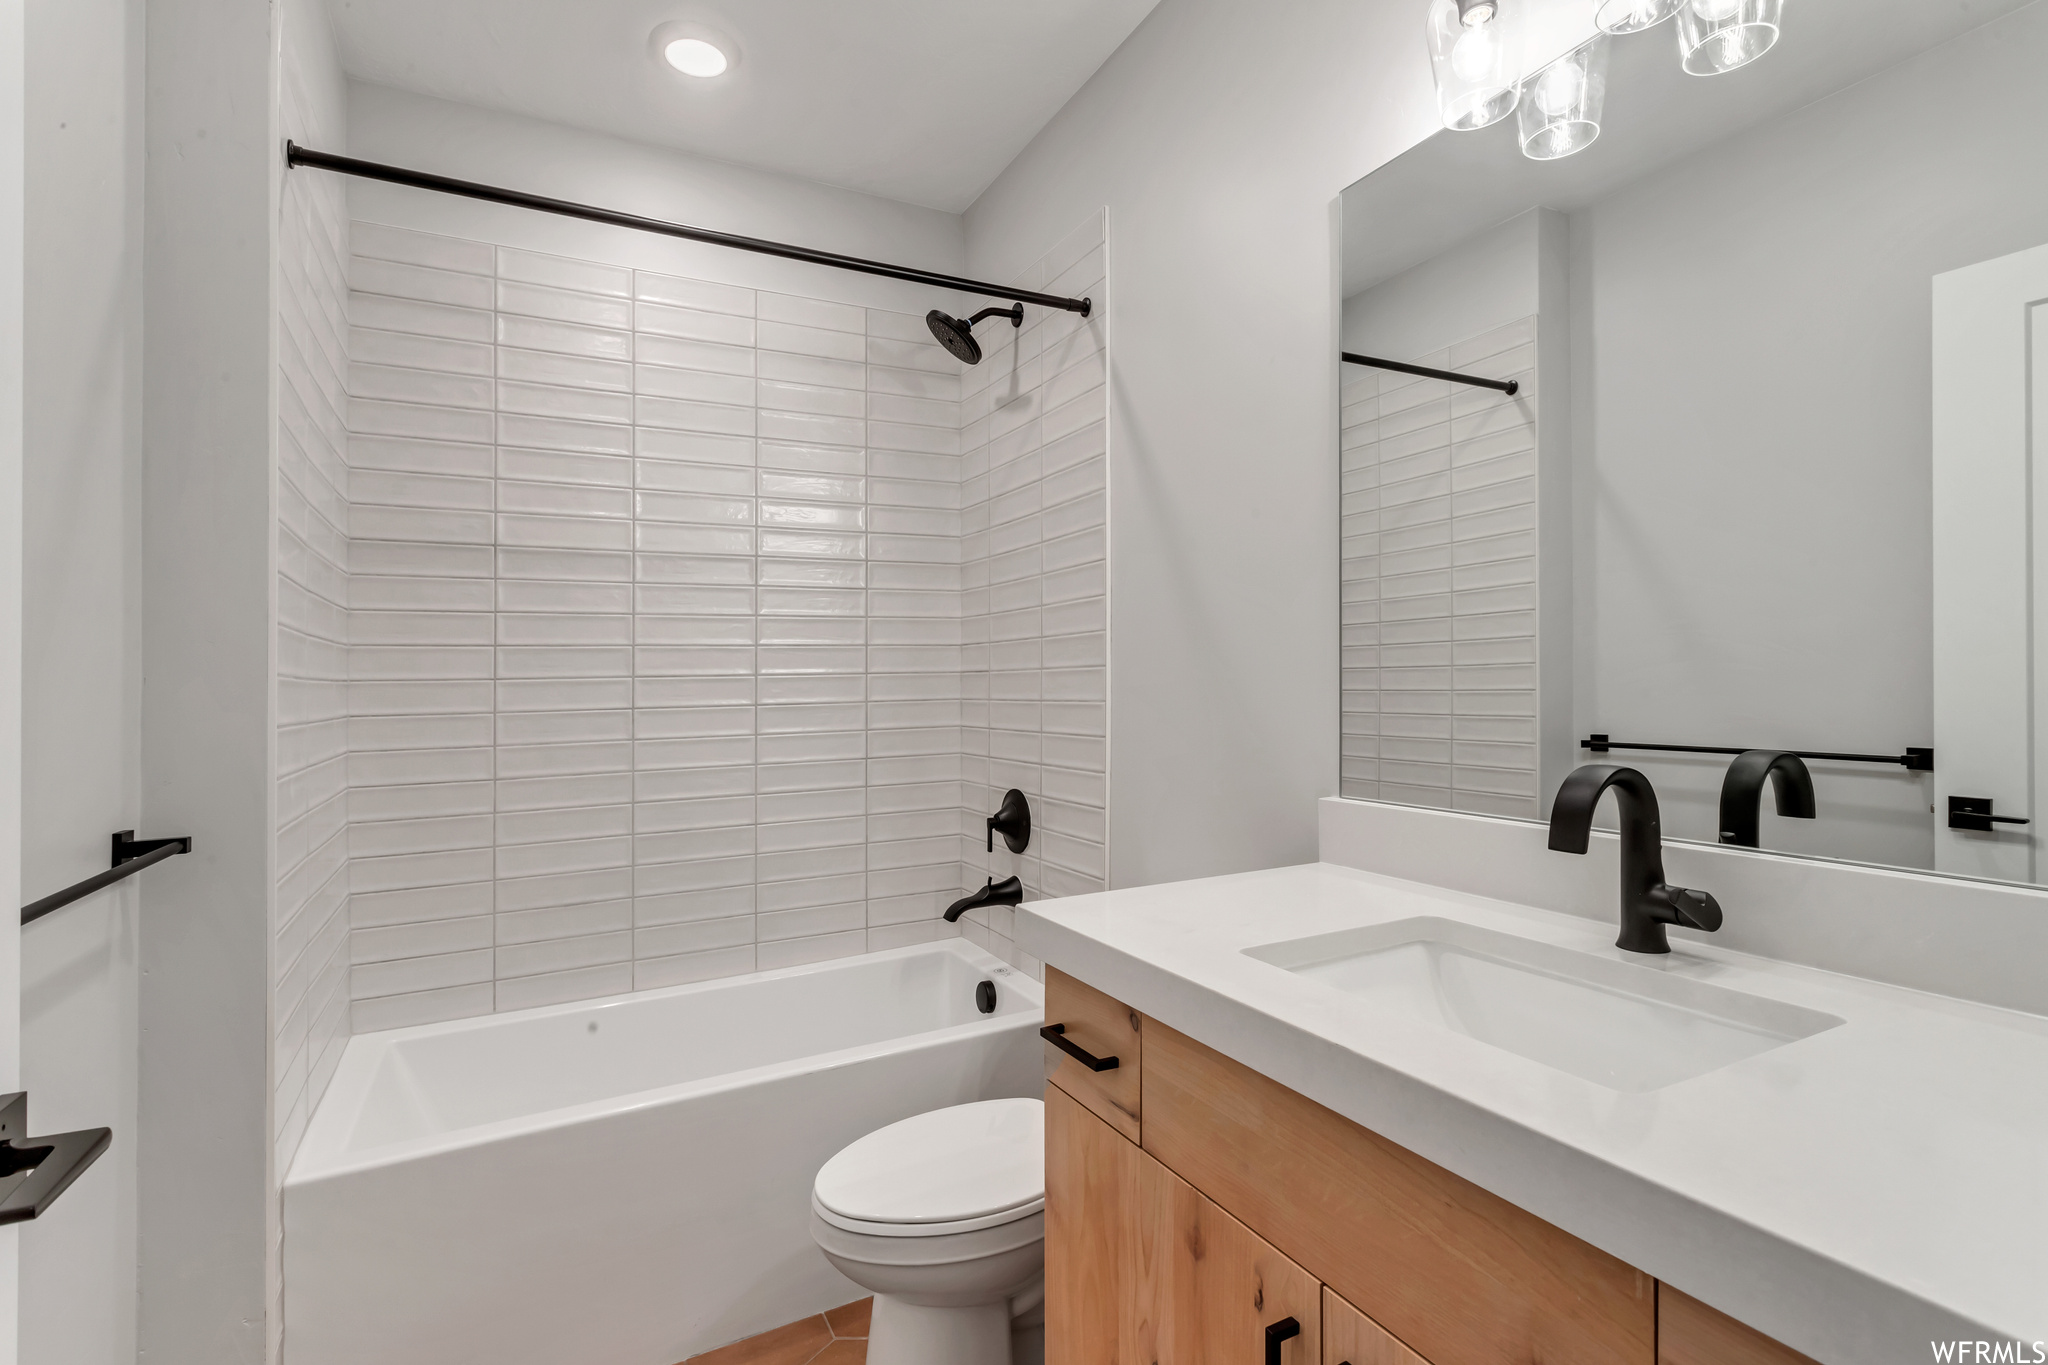 This subway tile surround makes for a lovely guest bath